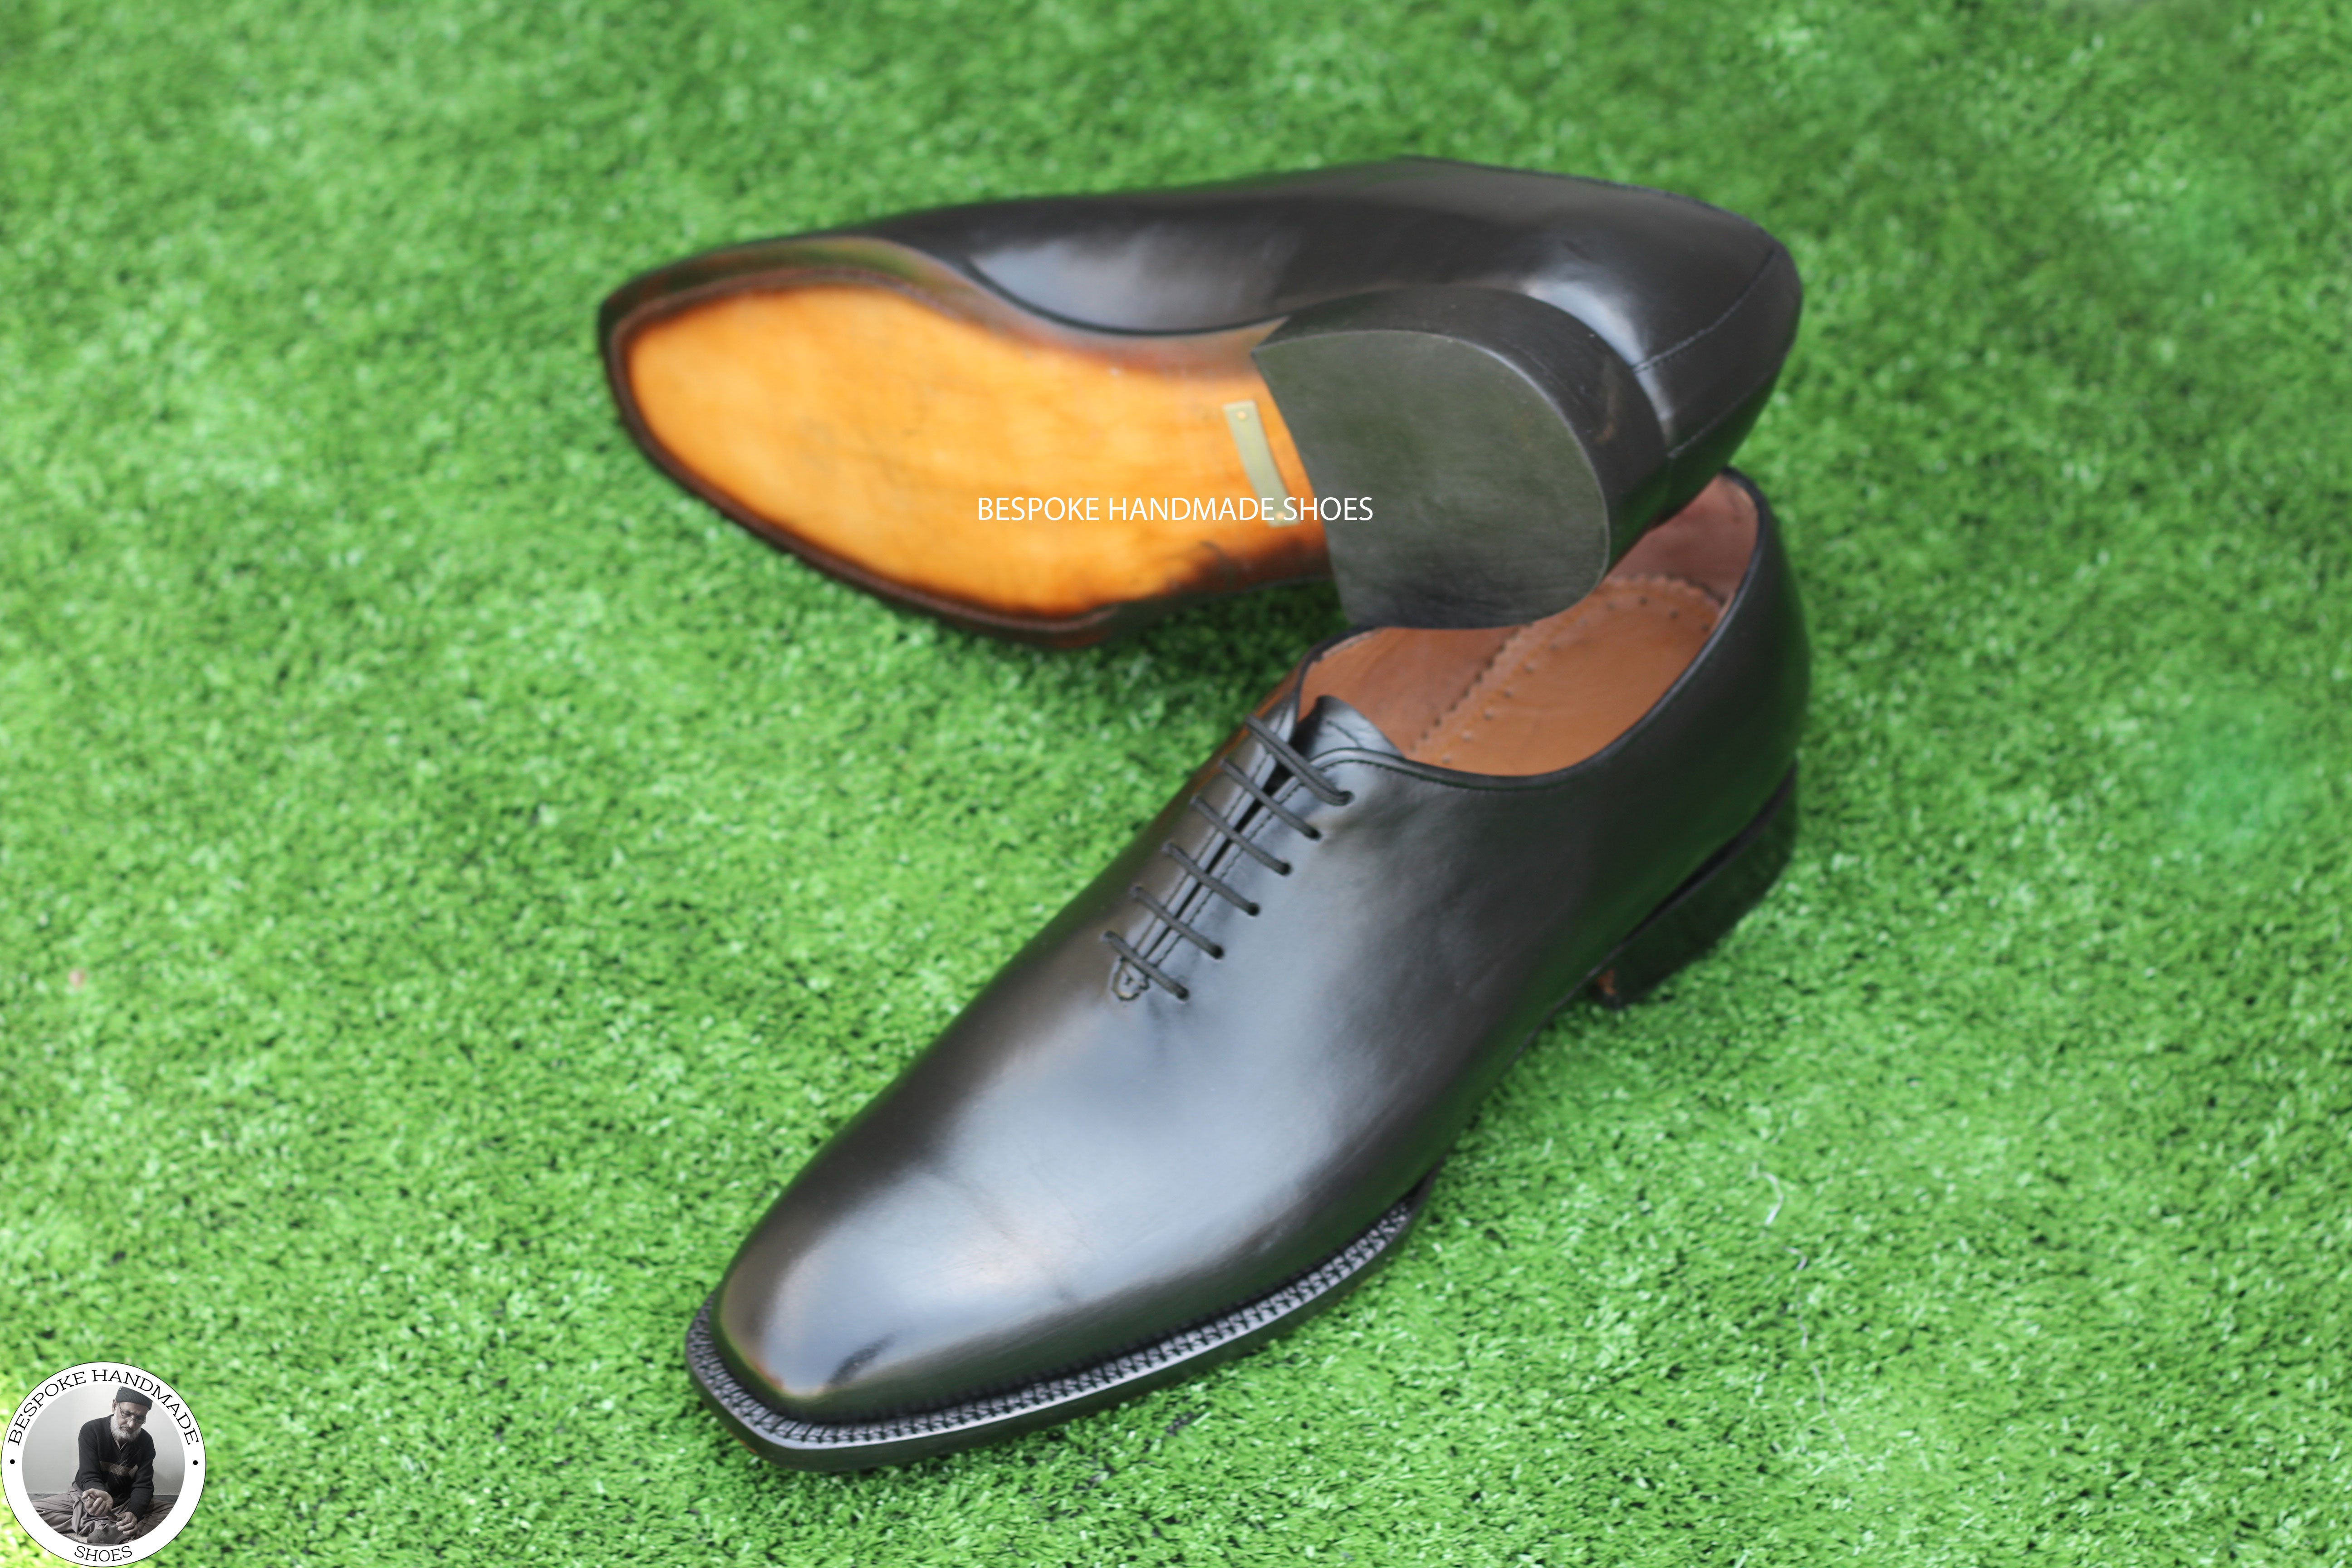 New Men's Handmade, Genuine Black Leather Oxford Whole Cut Lace Up Party Wear Shoes